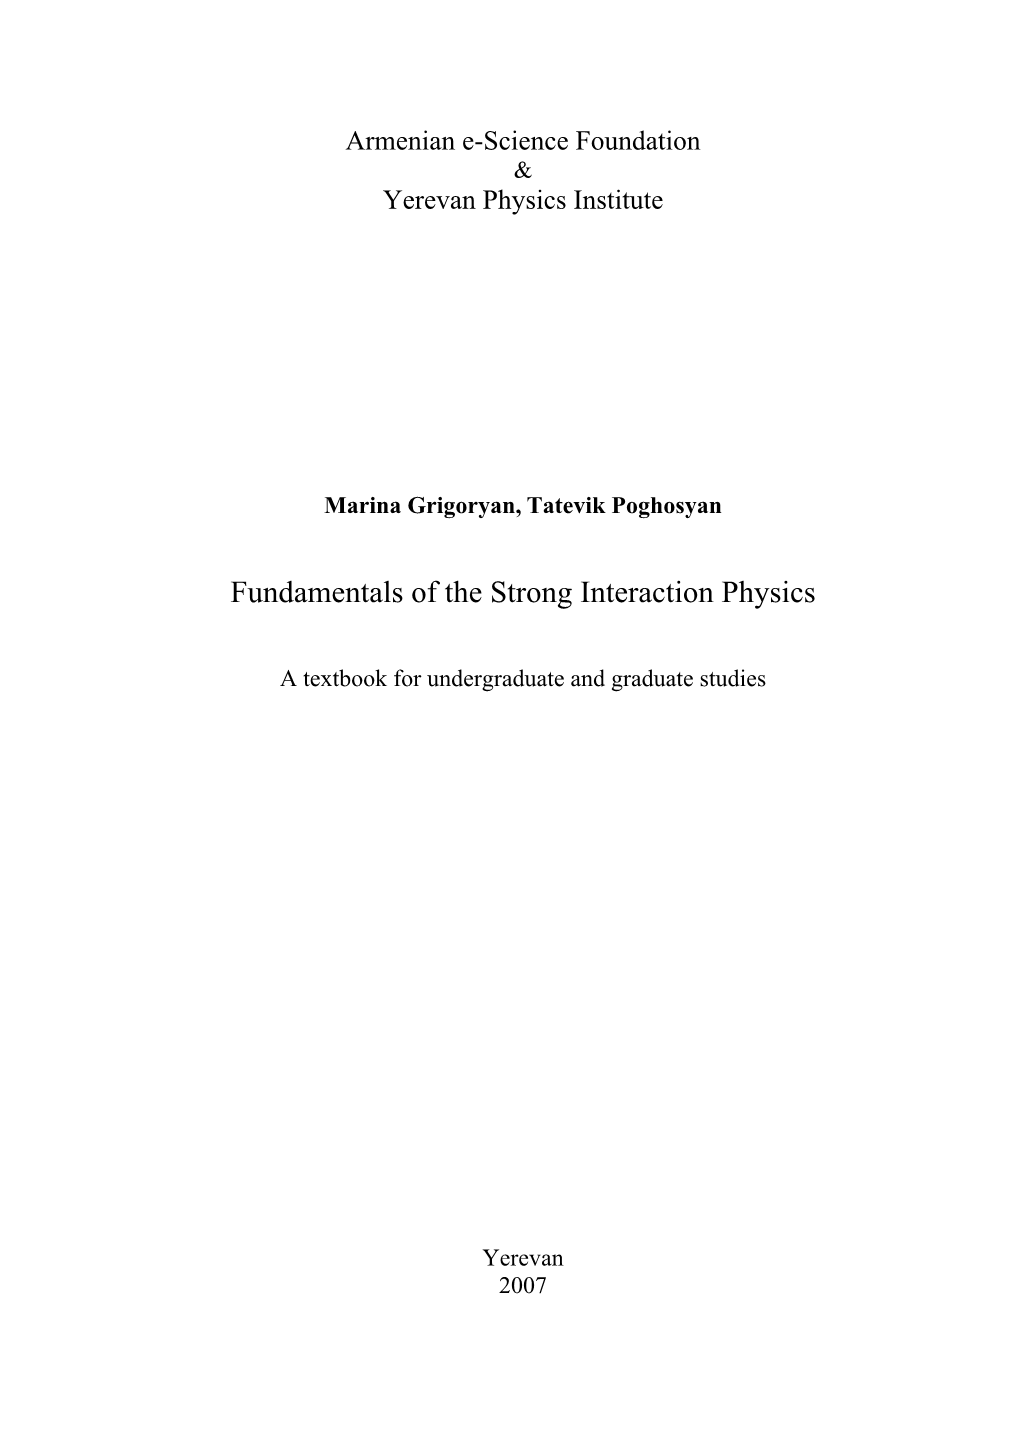 Fundamentals of the Strong Interaction Physics